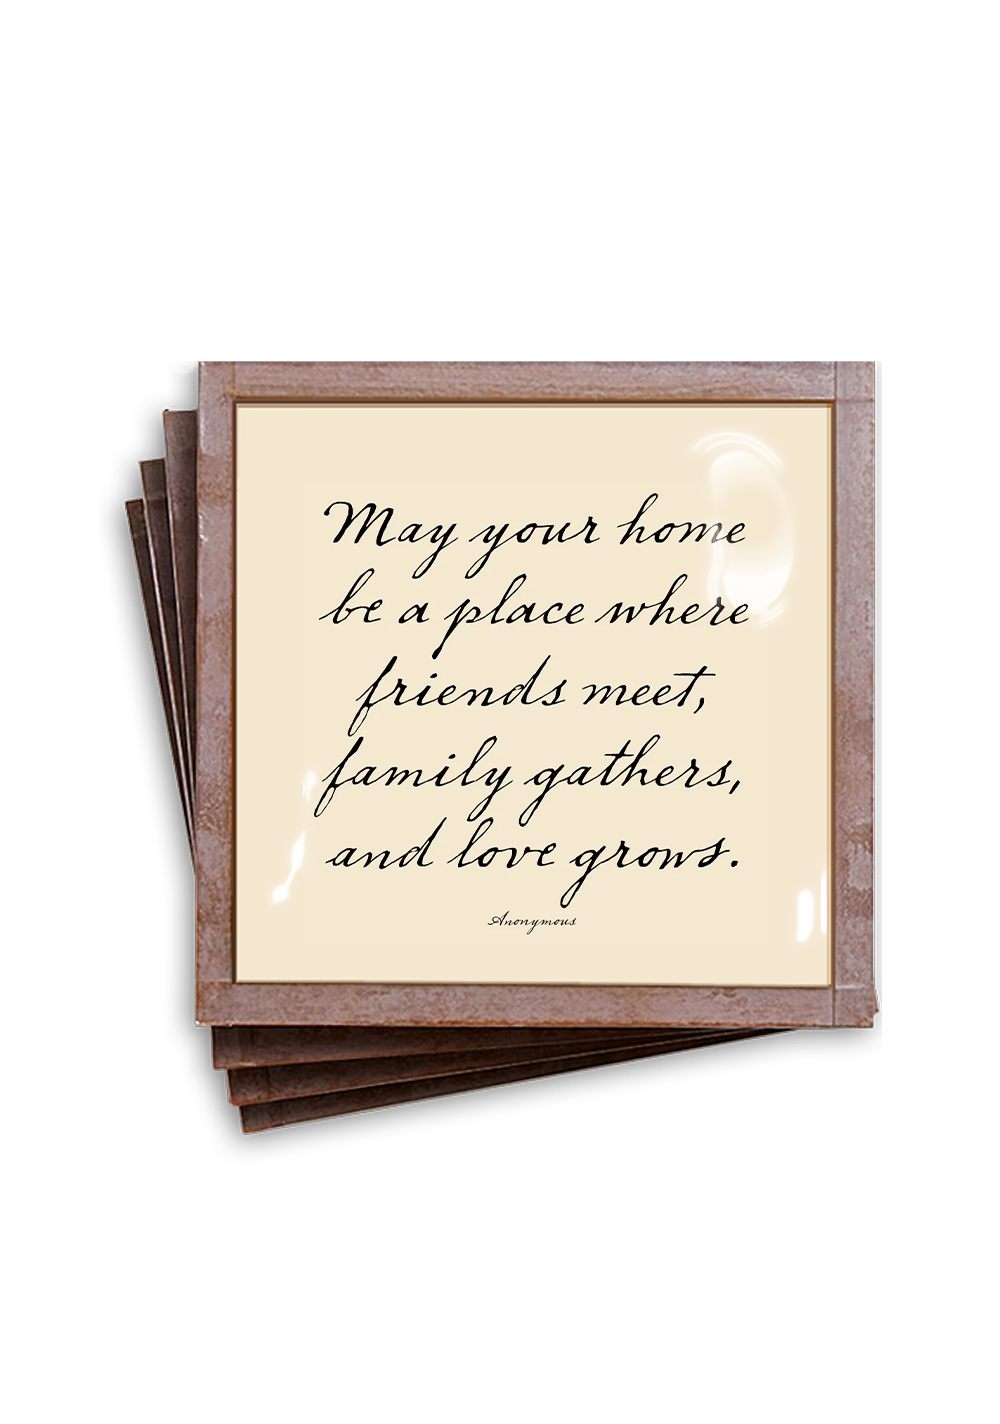 Bensgarden.com | May Your Home Copper & Glass Coasters, Set of 4 - Ben's Garden. Made in New York City.